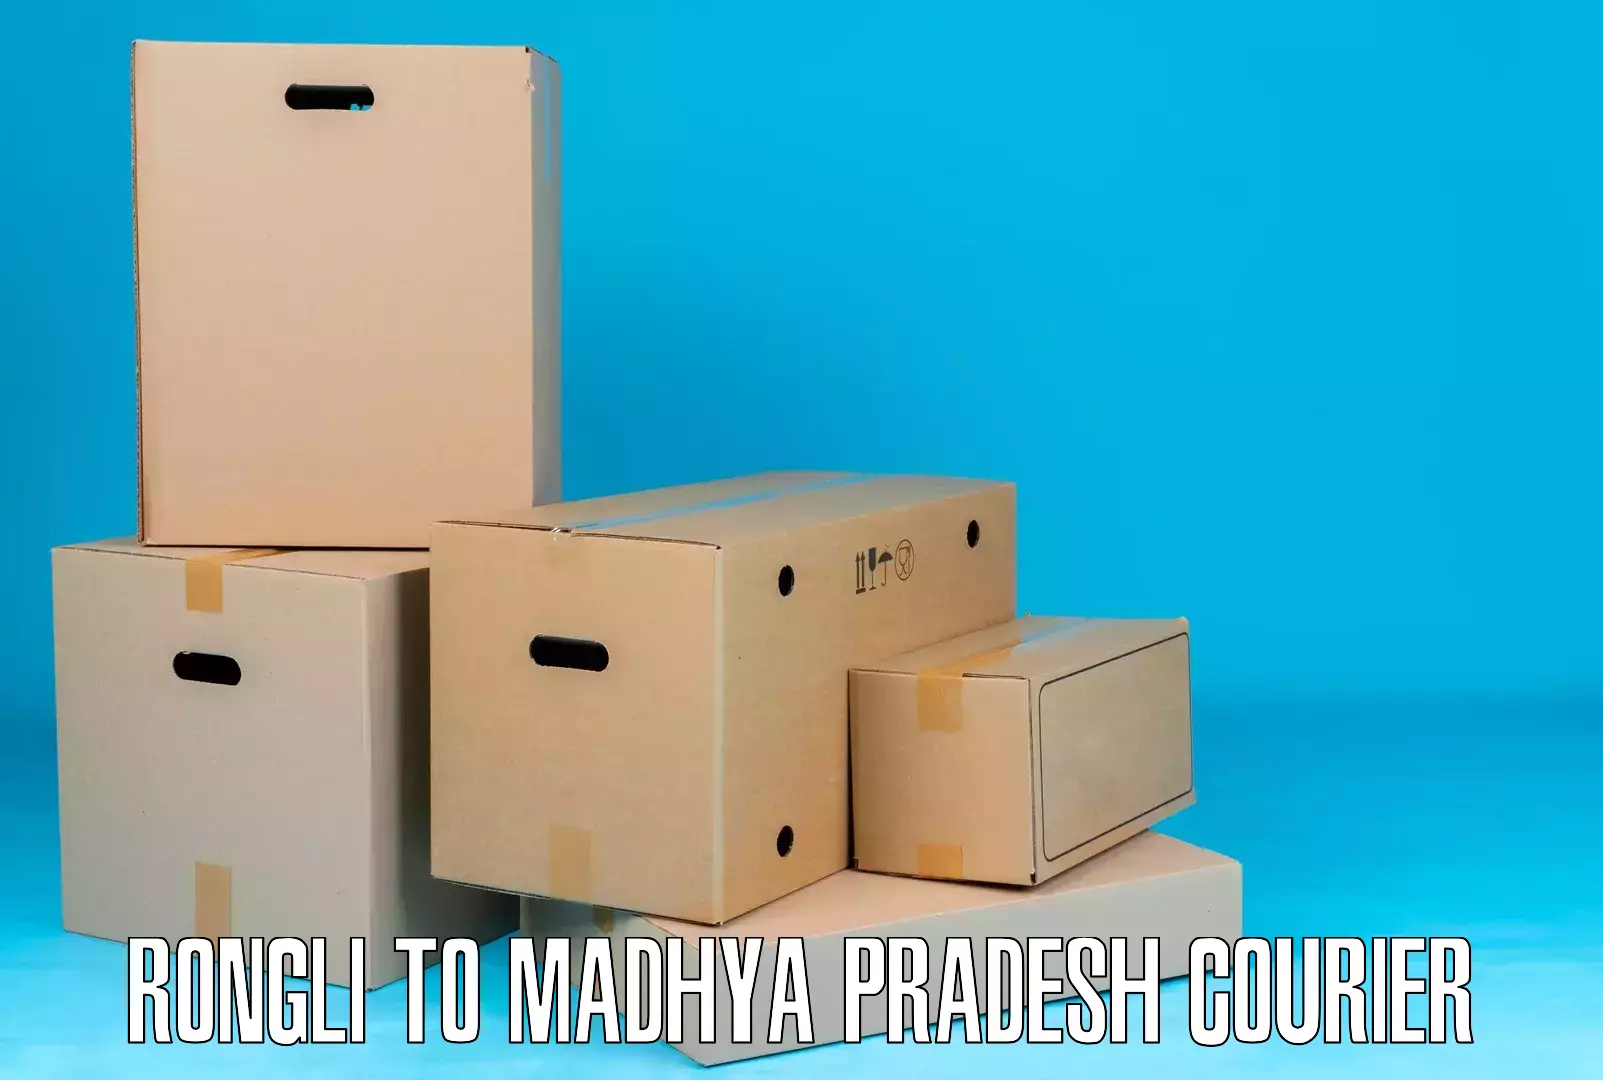 Package delivery network Rongli to Madhya Pradesh